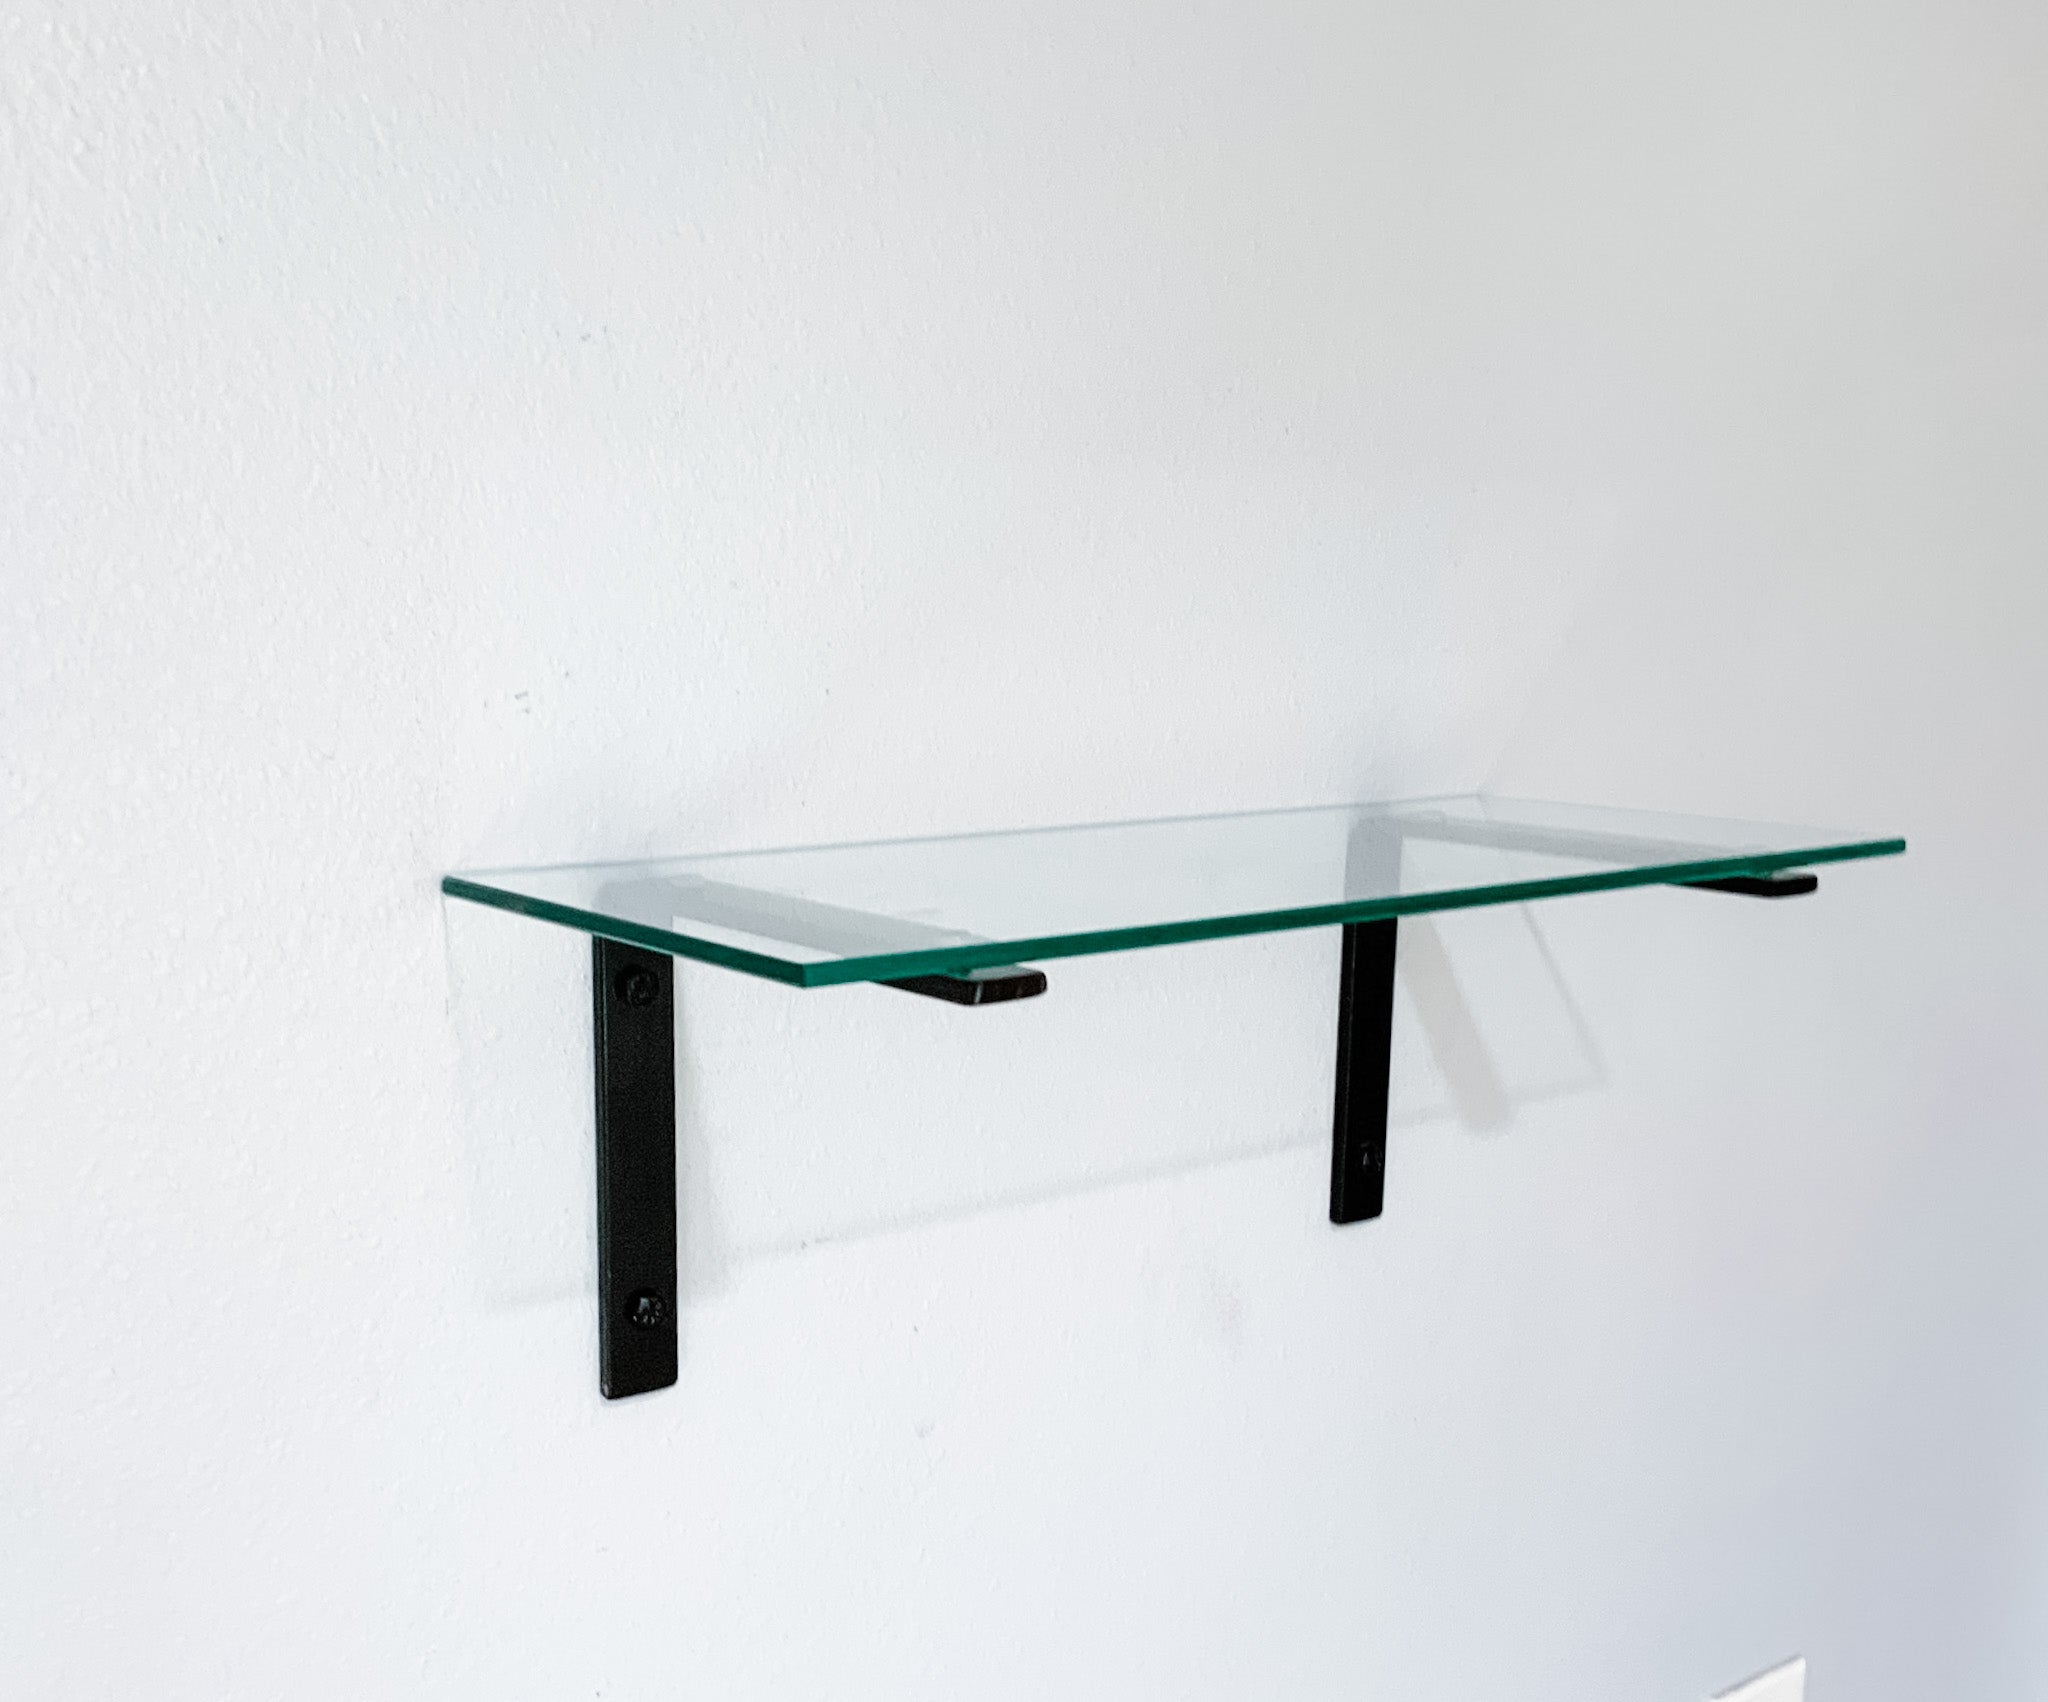 How to Install a Floating Glass Shelf